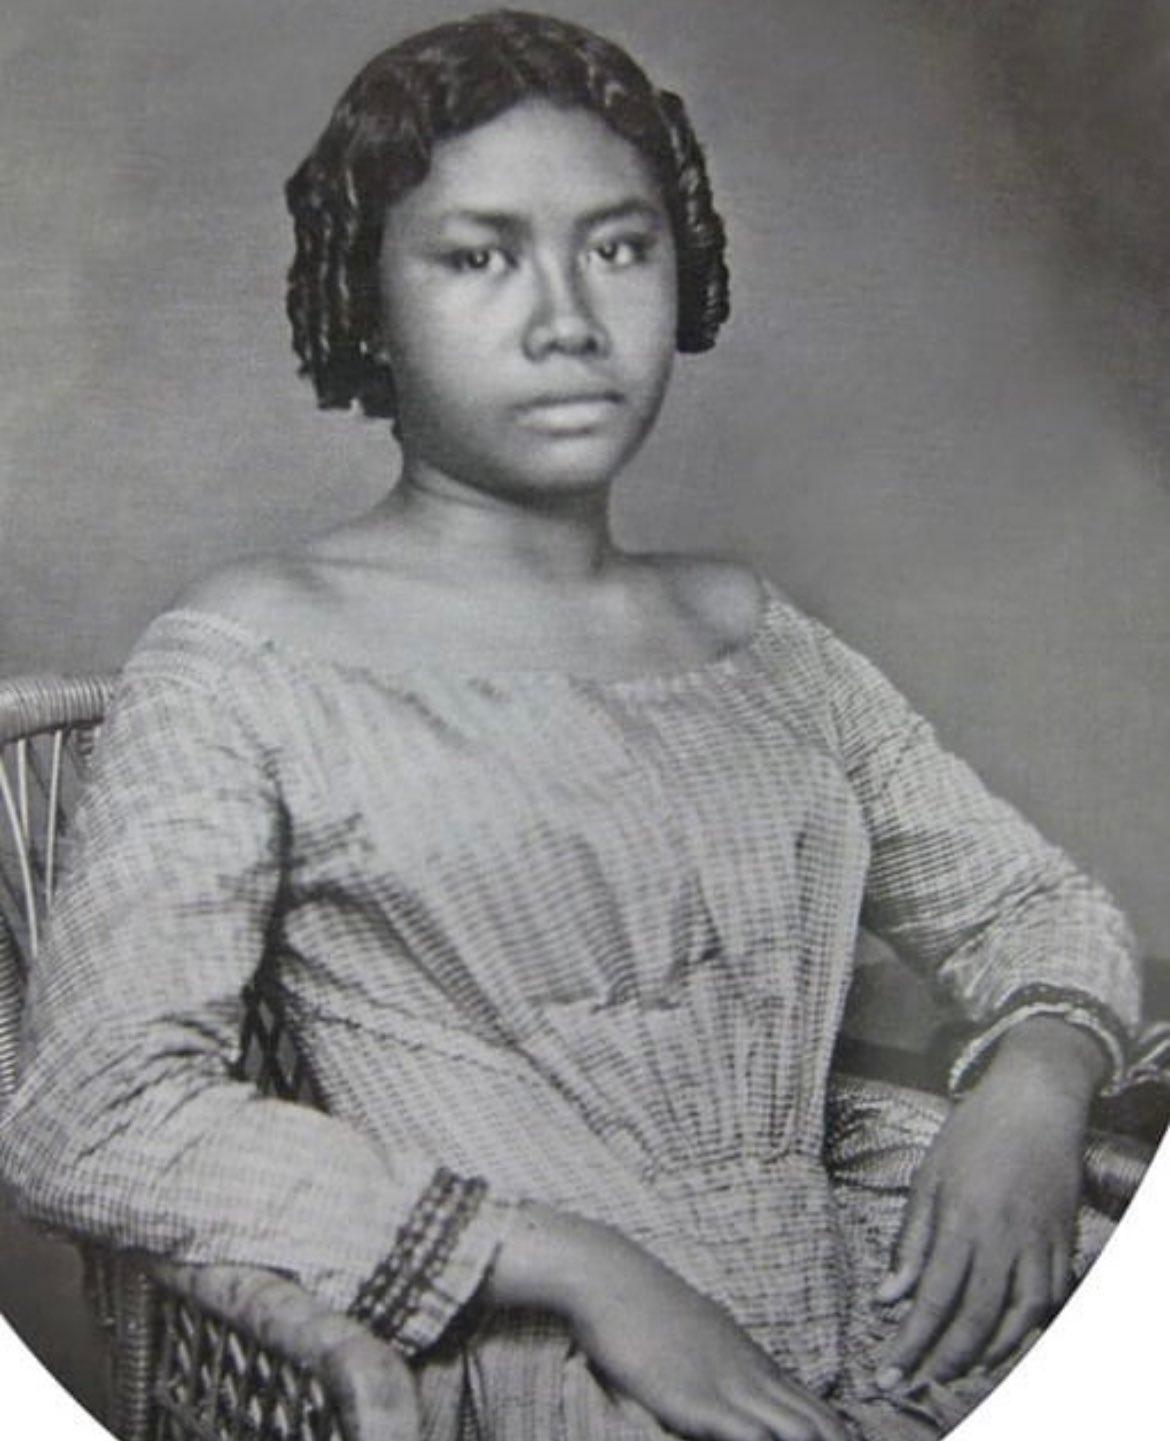 Princess Lili'uokalani. She would become the last sovereign ruler of Hawaii. The photo was taken in 1853 when she was 15 years old.jpg